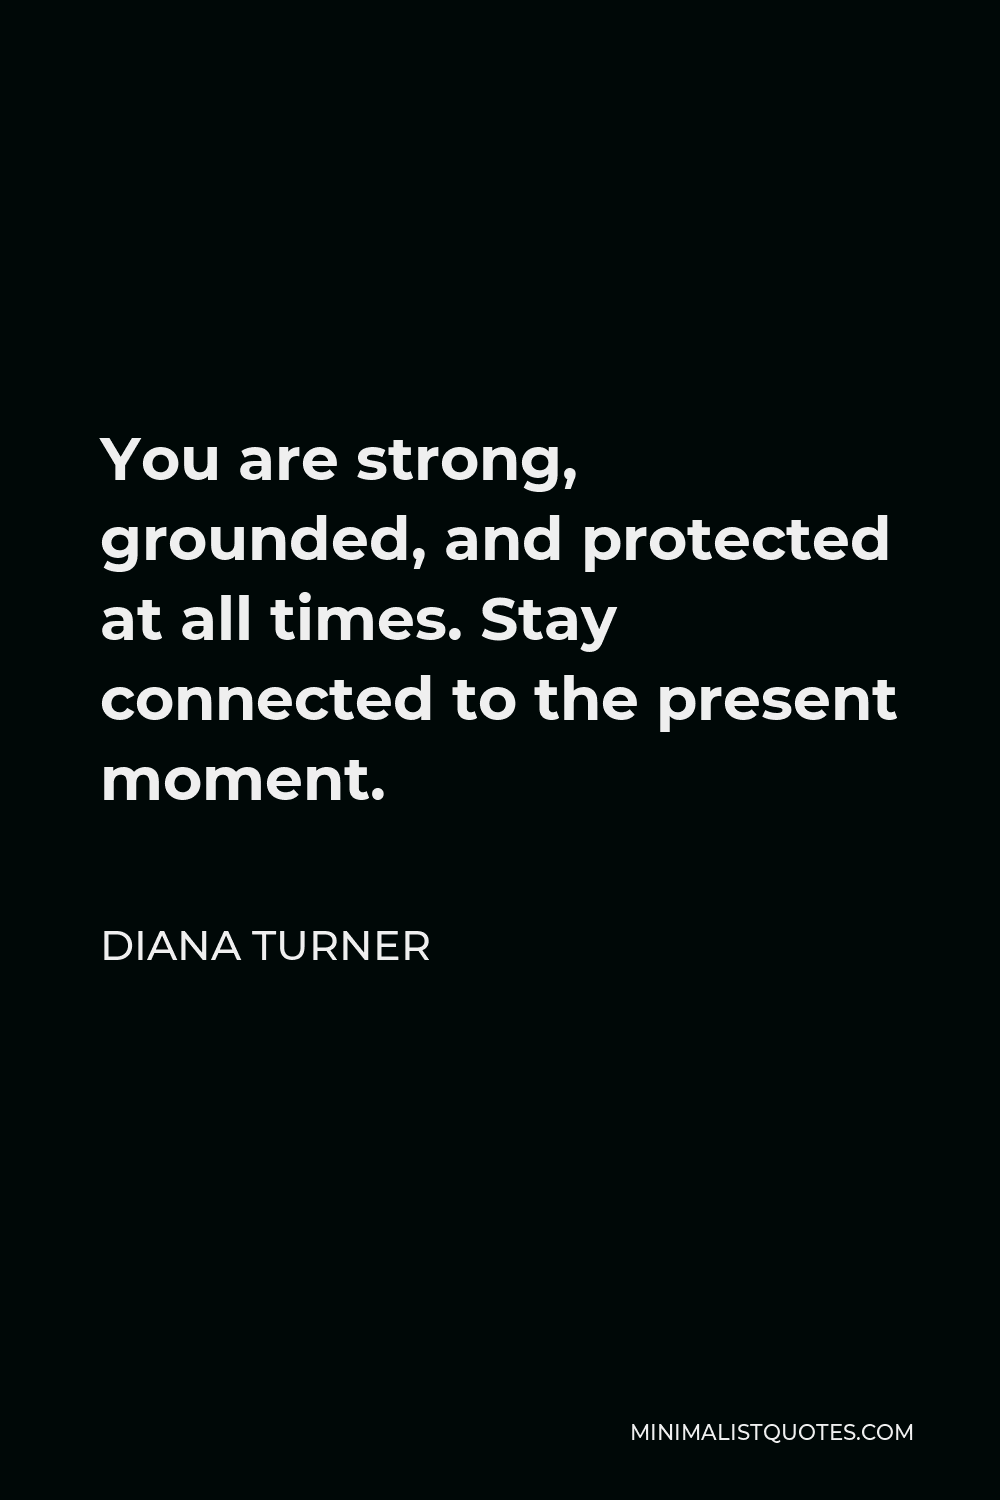 Diana Turner Quote - You are strong, grounded, and protected at all times. Stay connected to the present moment.